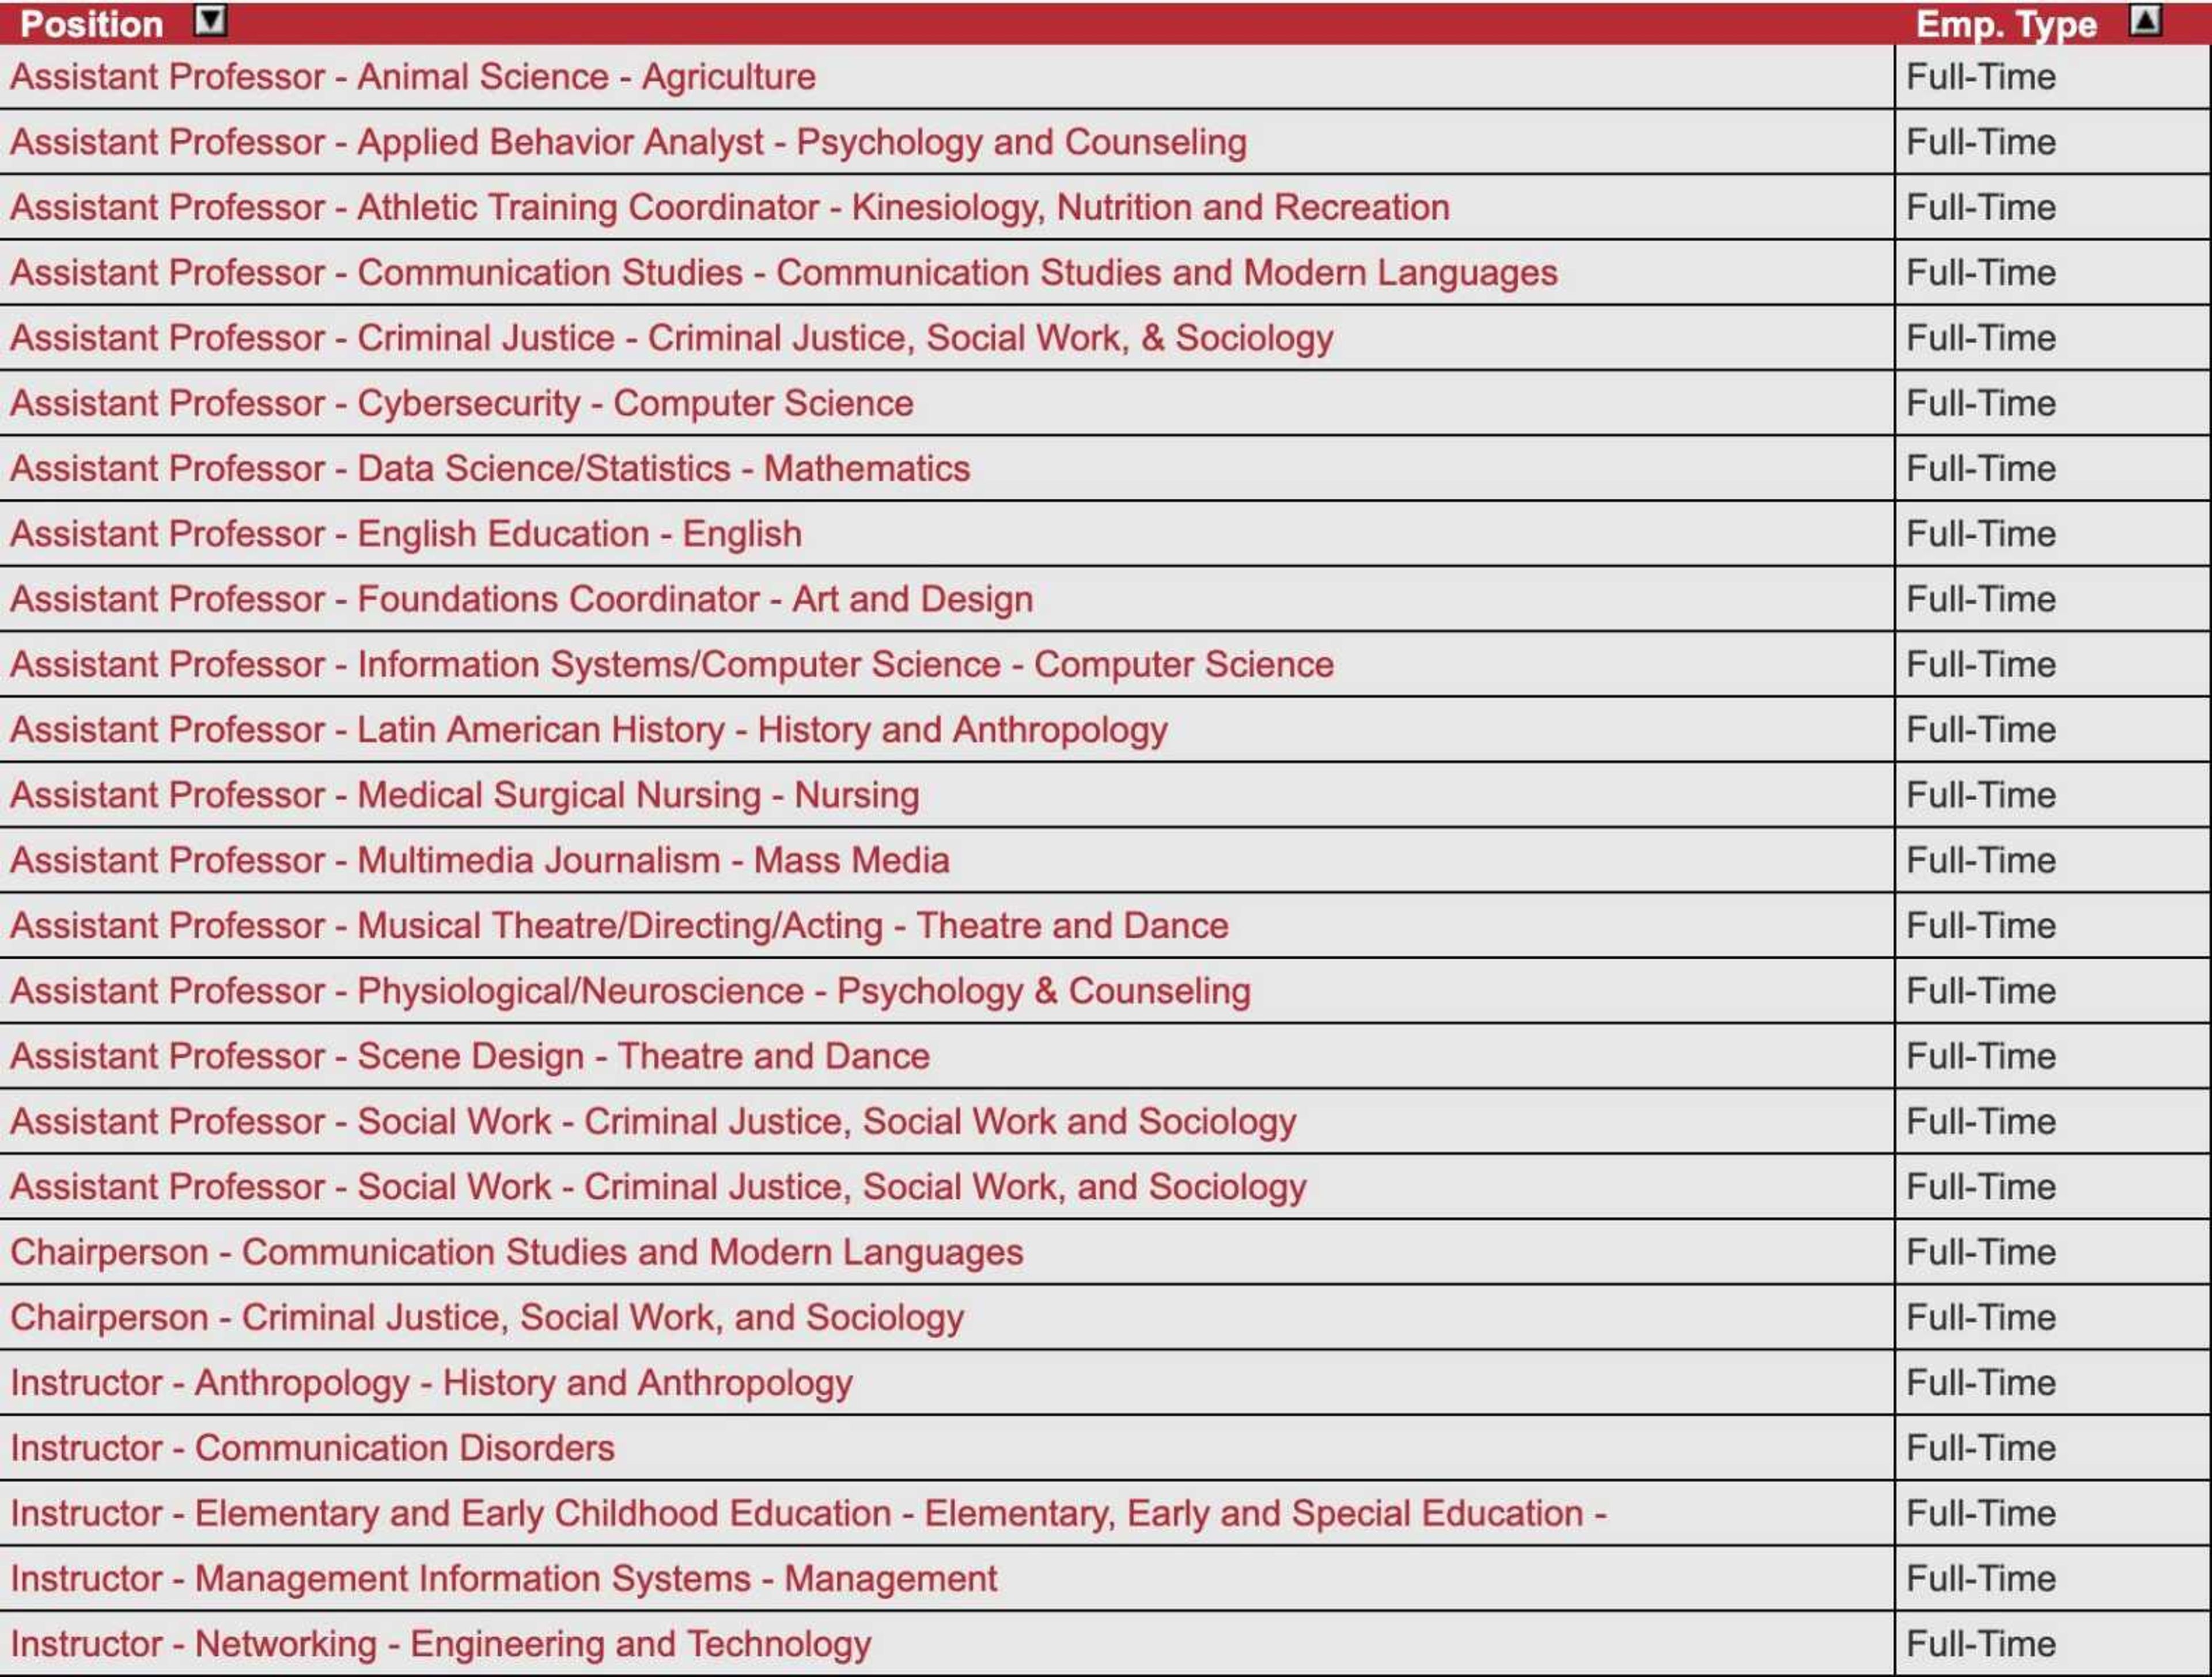 A screenshot showing a portion of the faculty job listings on Southeast's website.